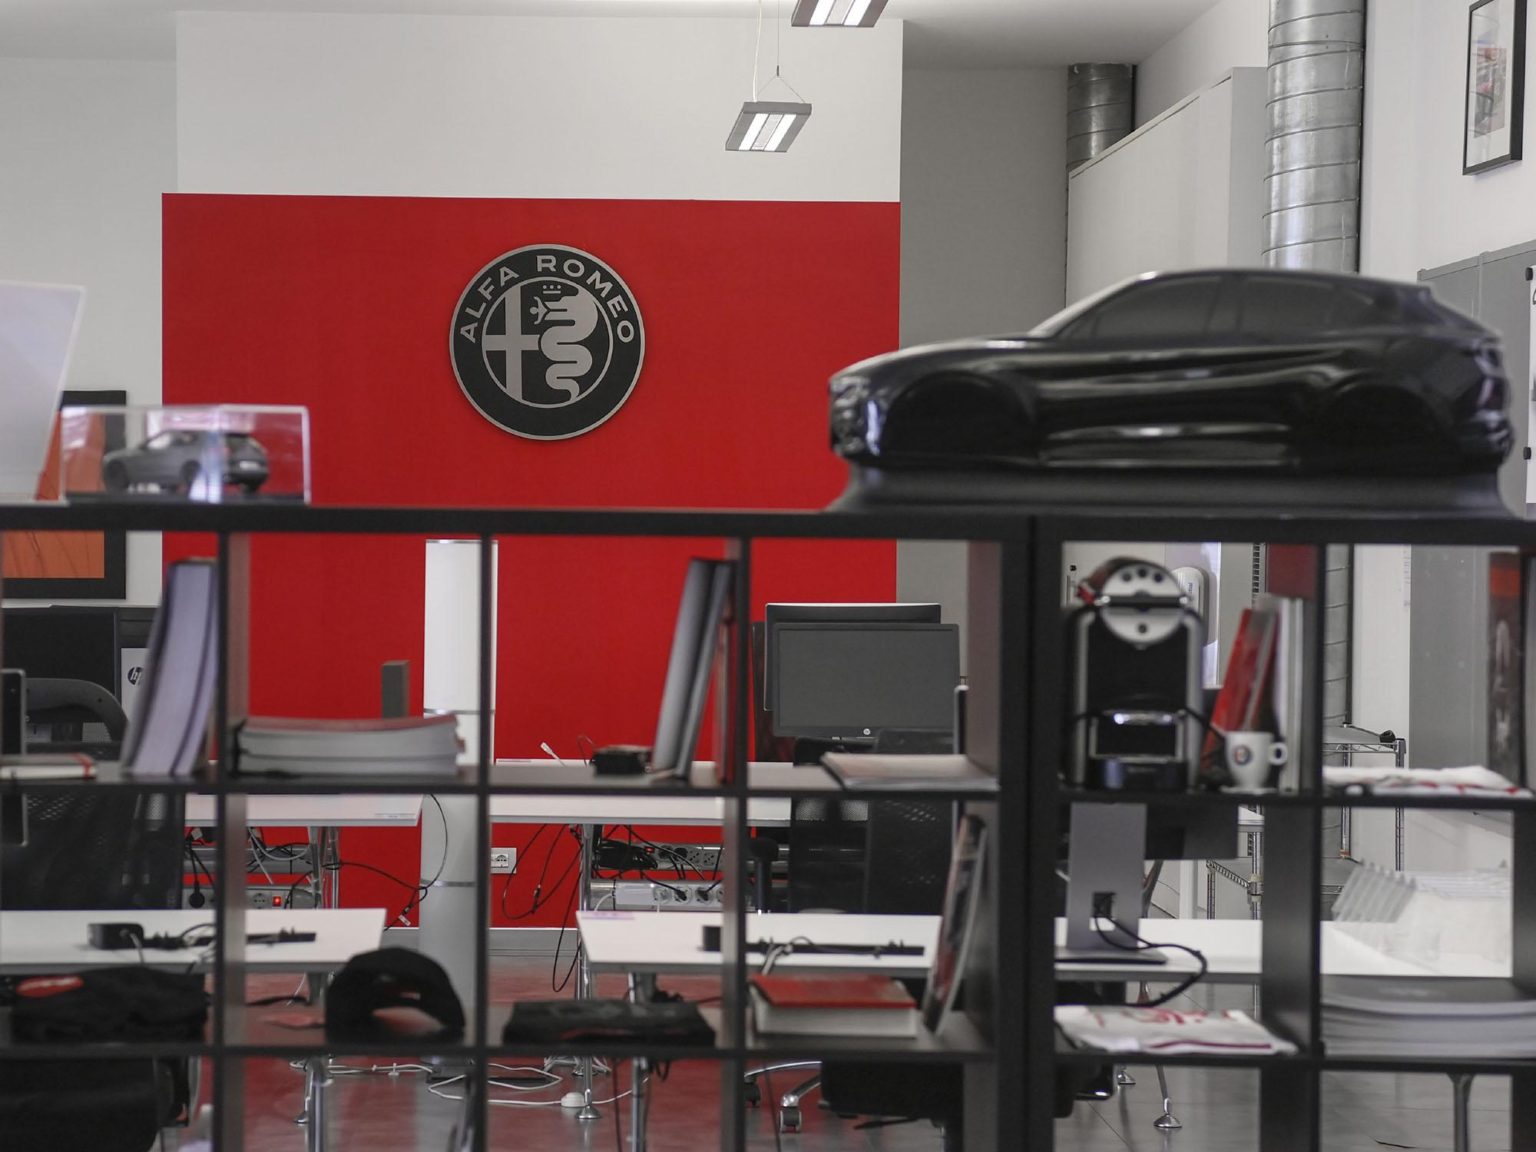 Alfa Romeo's new headquarters is open for business.